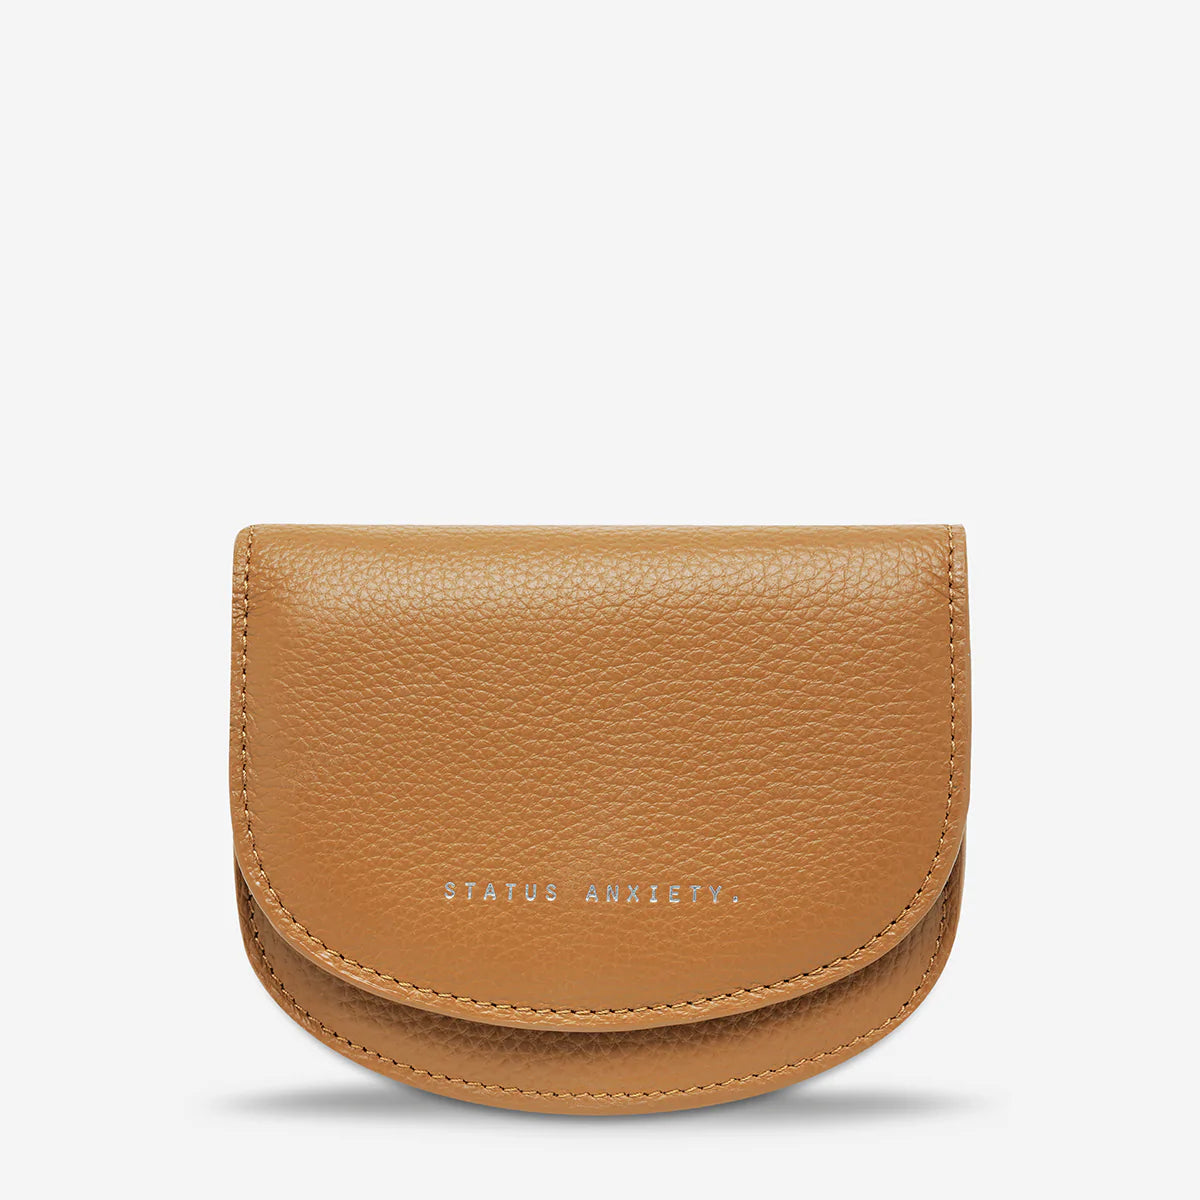 Status Anxiety | Us For Now Wallet - Found My Way Invercargill